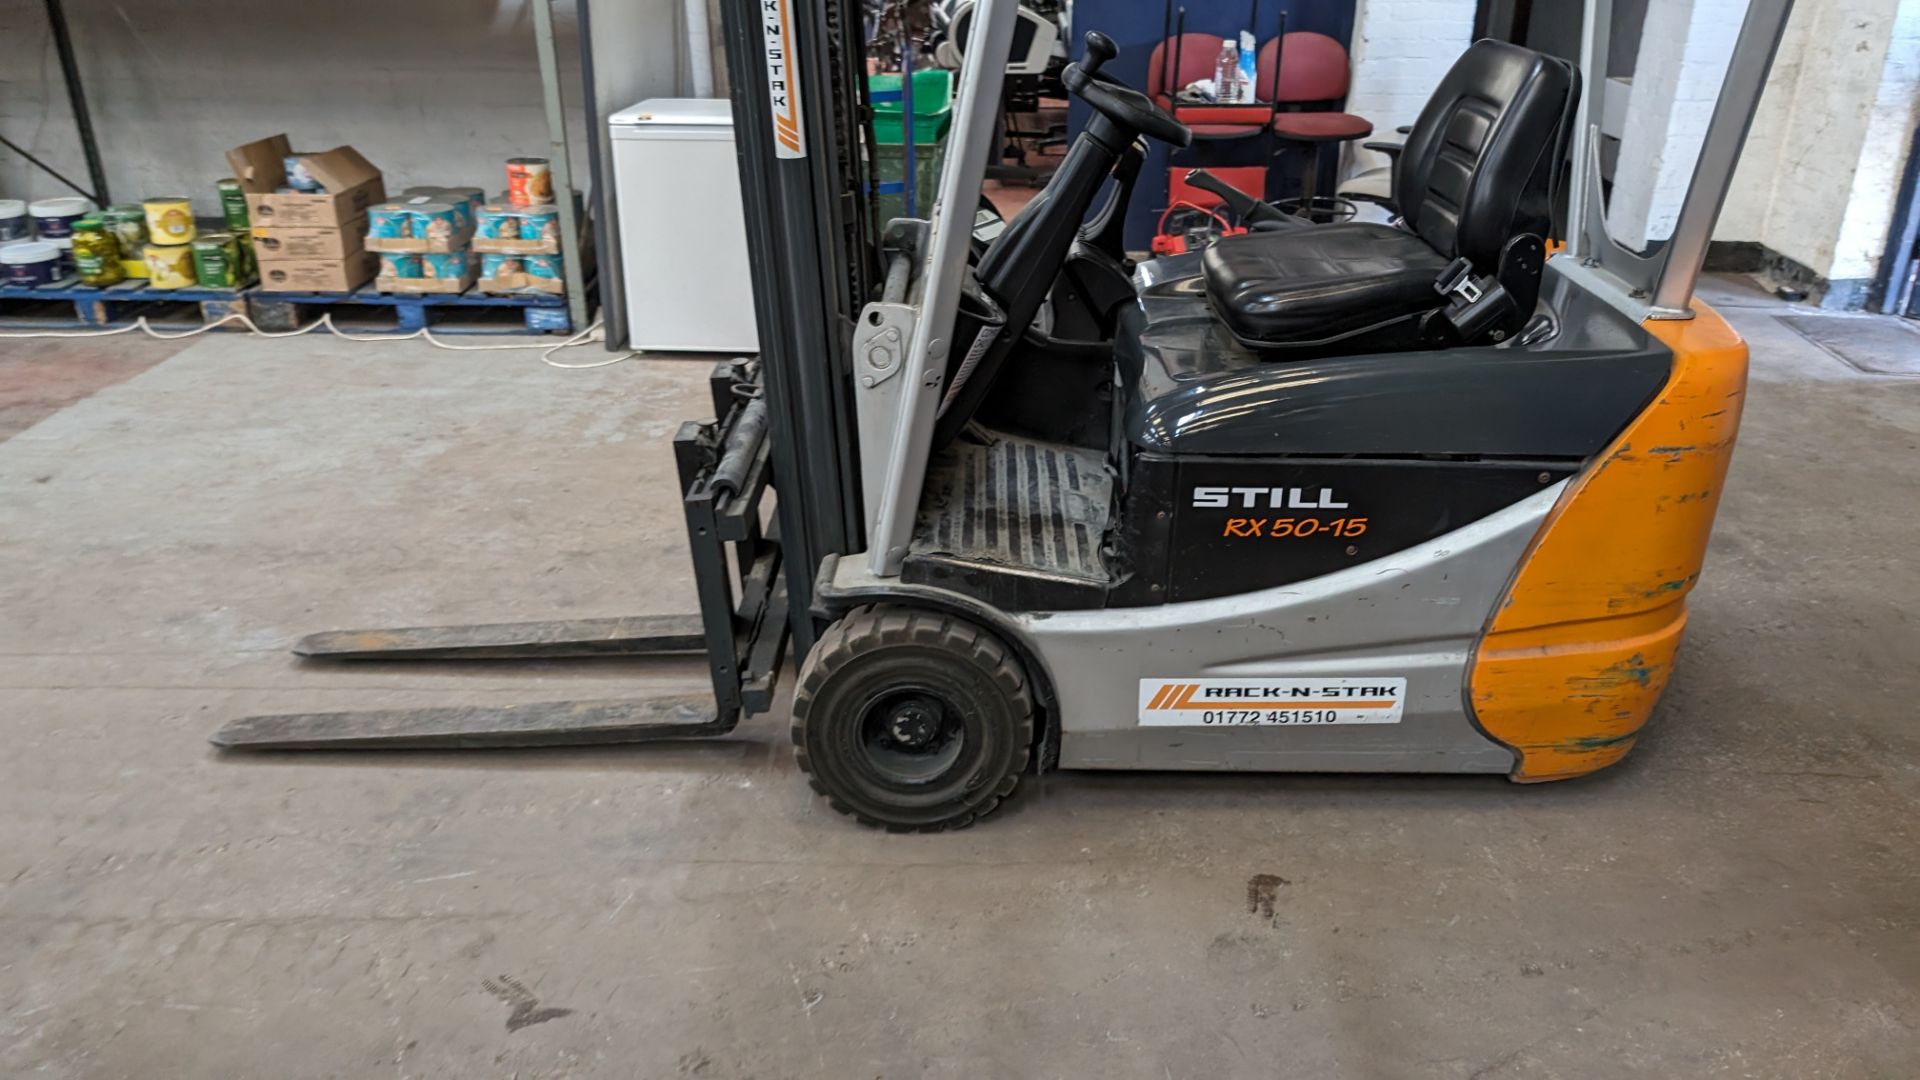 Still model RX-5015 3-wheel electric forklift truck with sideshift, 1.5 tonne capacity, including St - Image 2 of 18